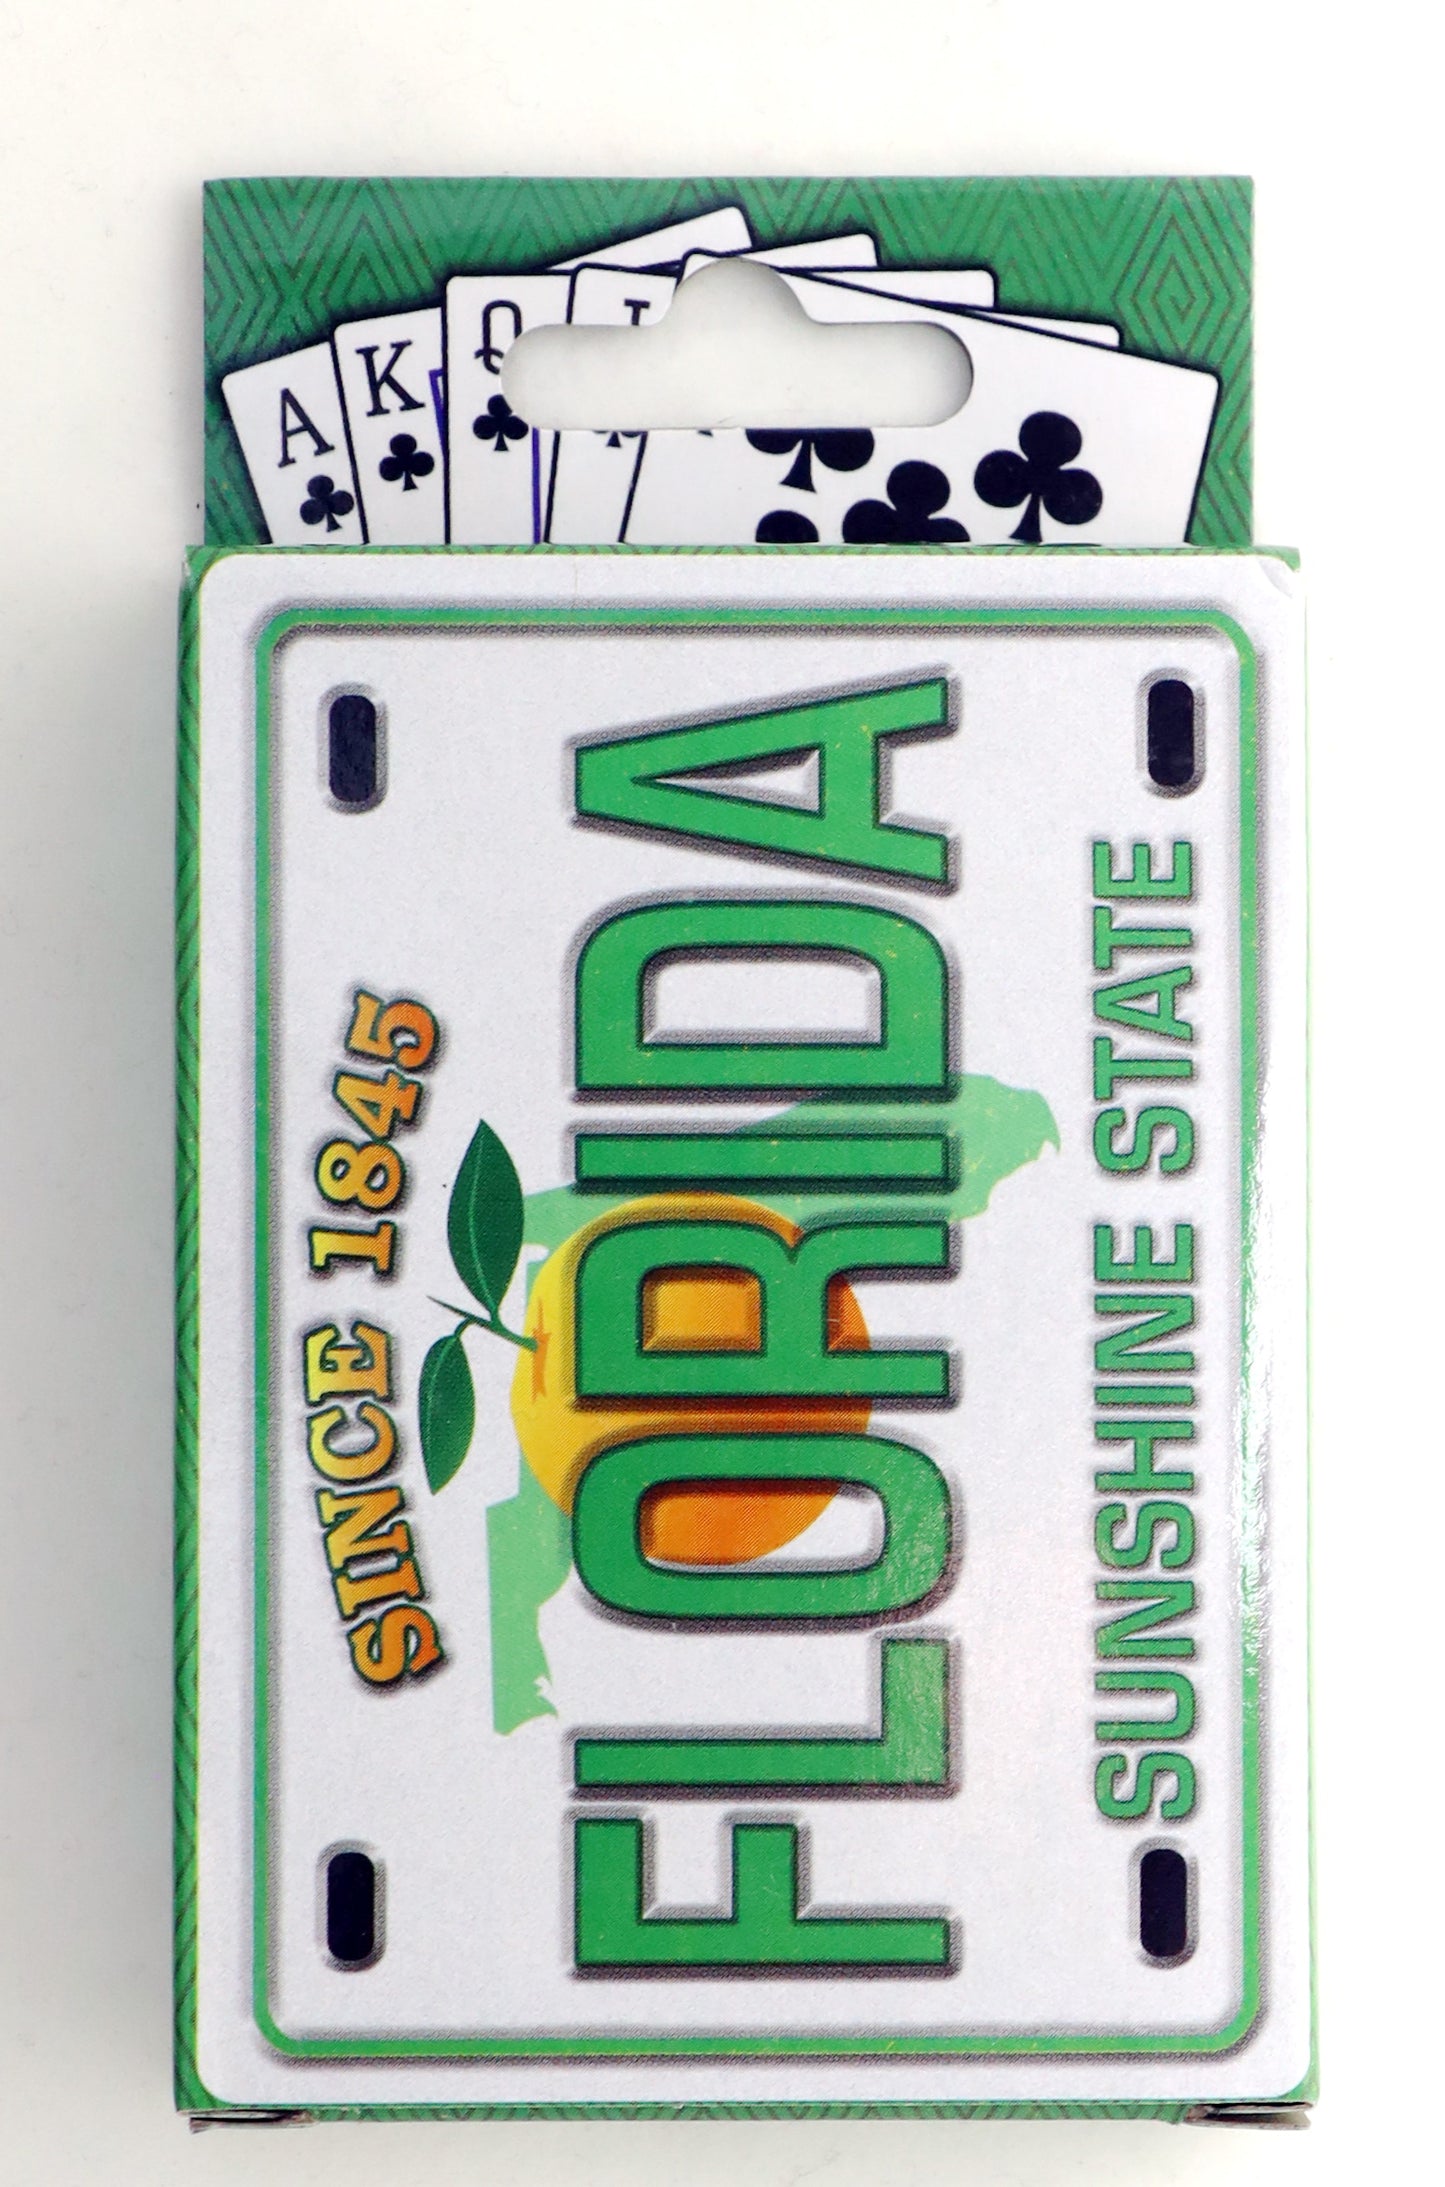 Florida License Plate Collectible Souvenir Playing Cards with Header